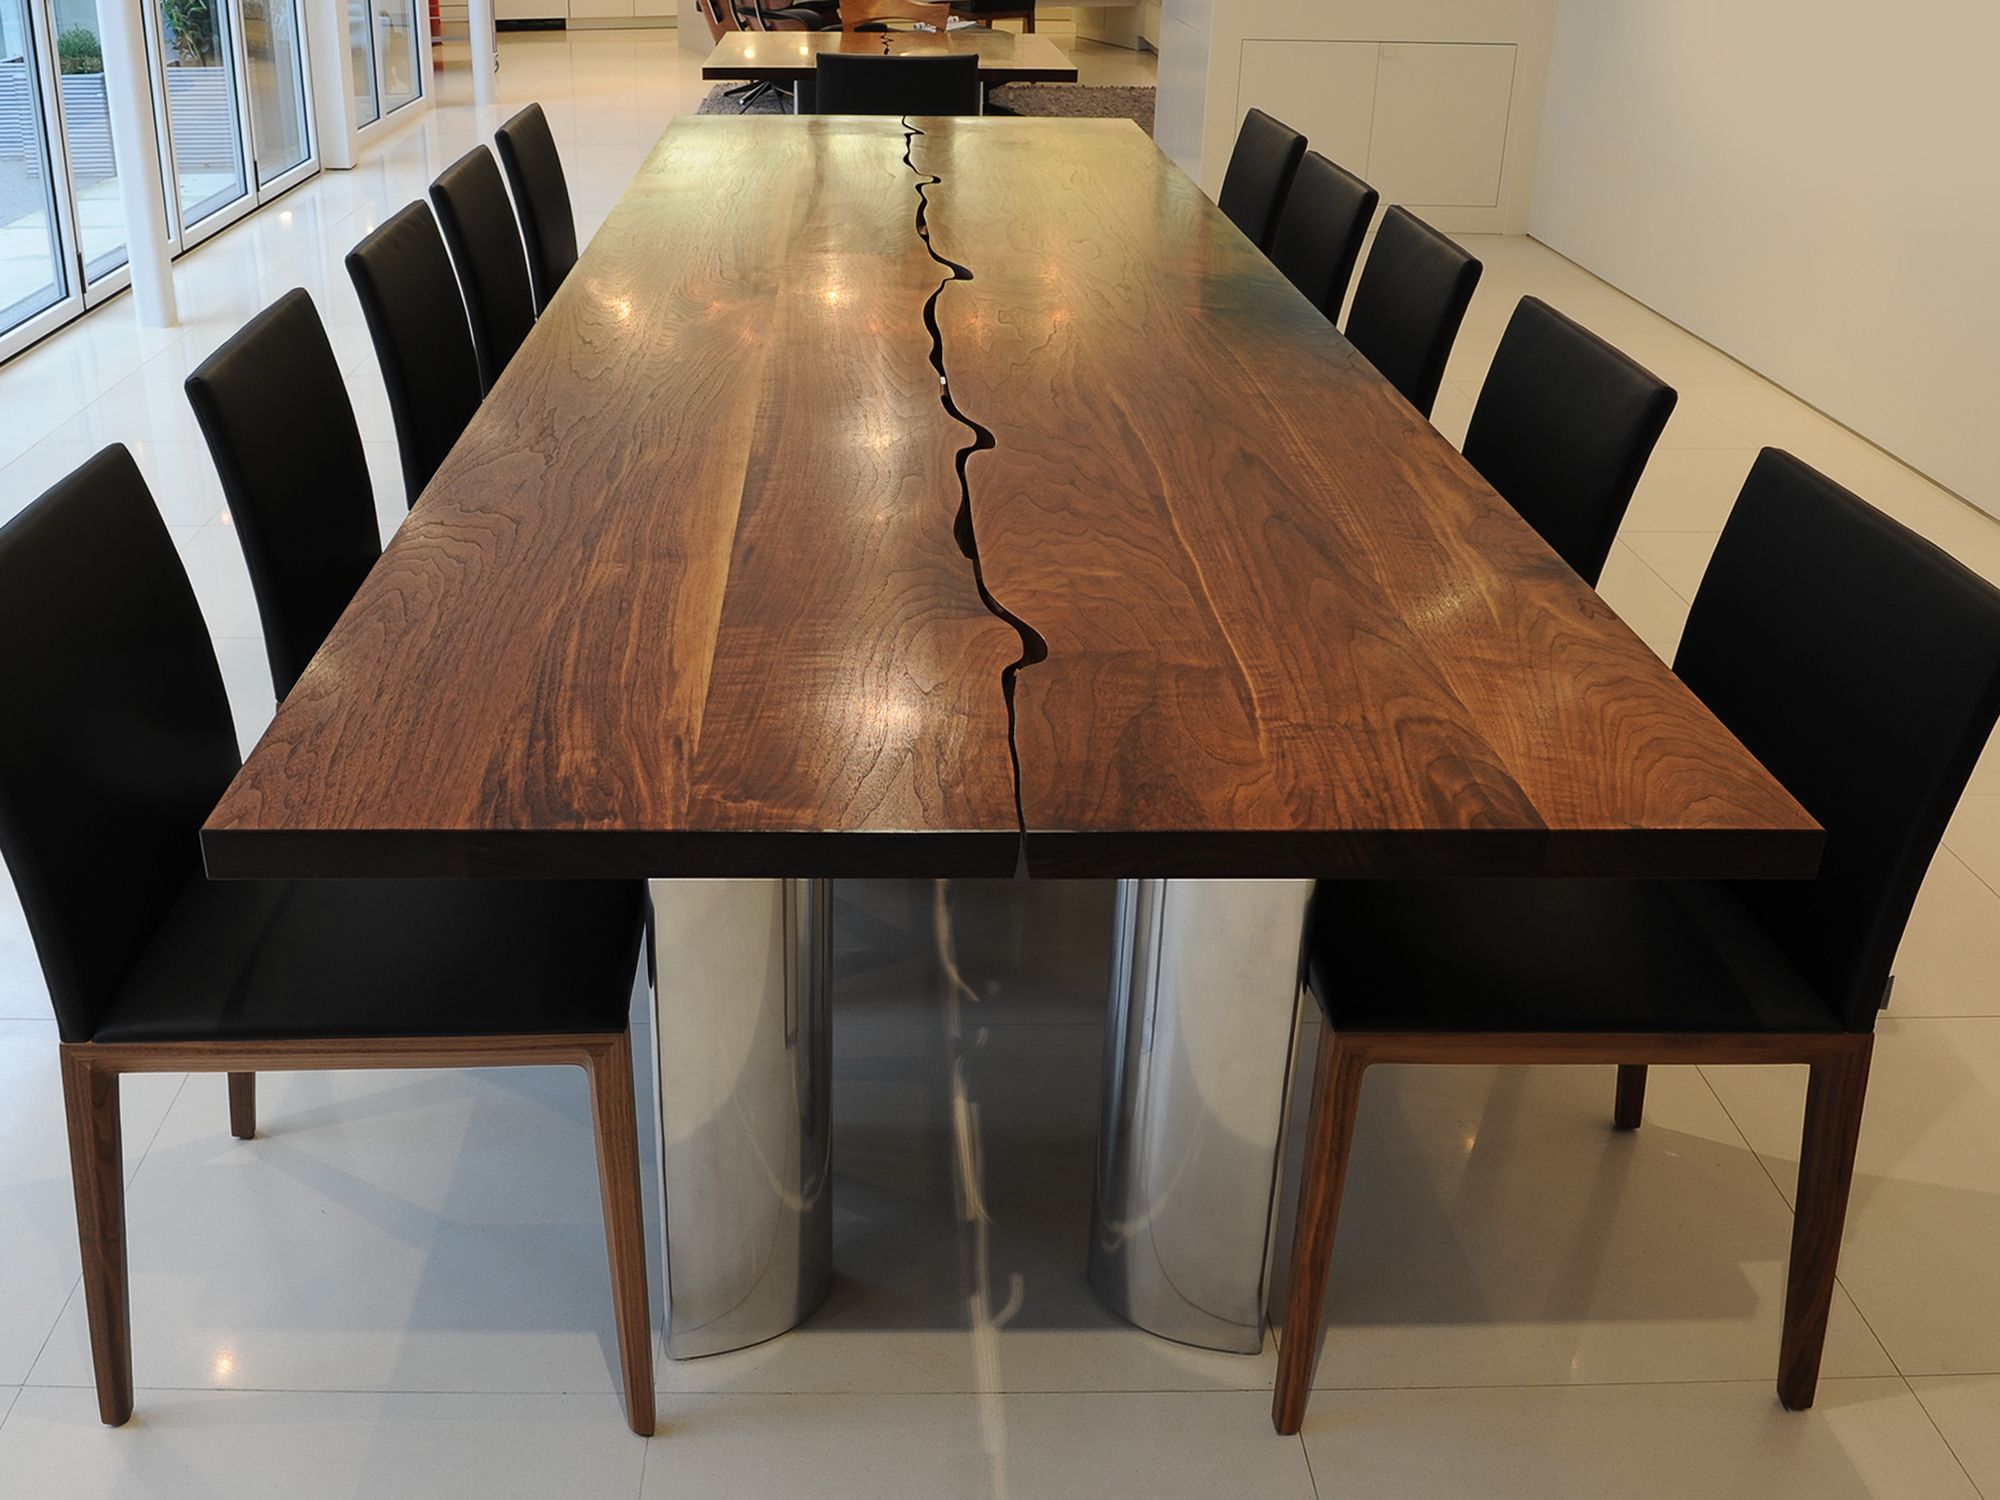 Bespoke Dining Or Conference Table In Solid Walnut Regarding Current Walnut And White Dining Tables (View 8 of 15)